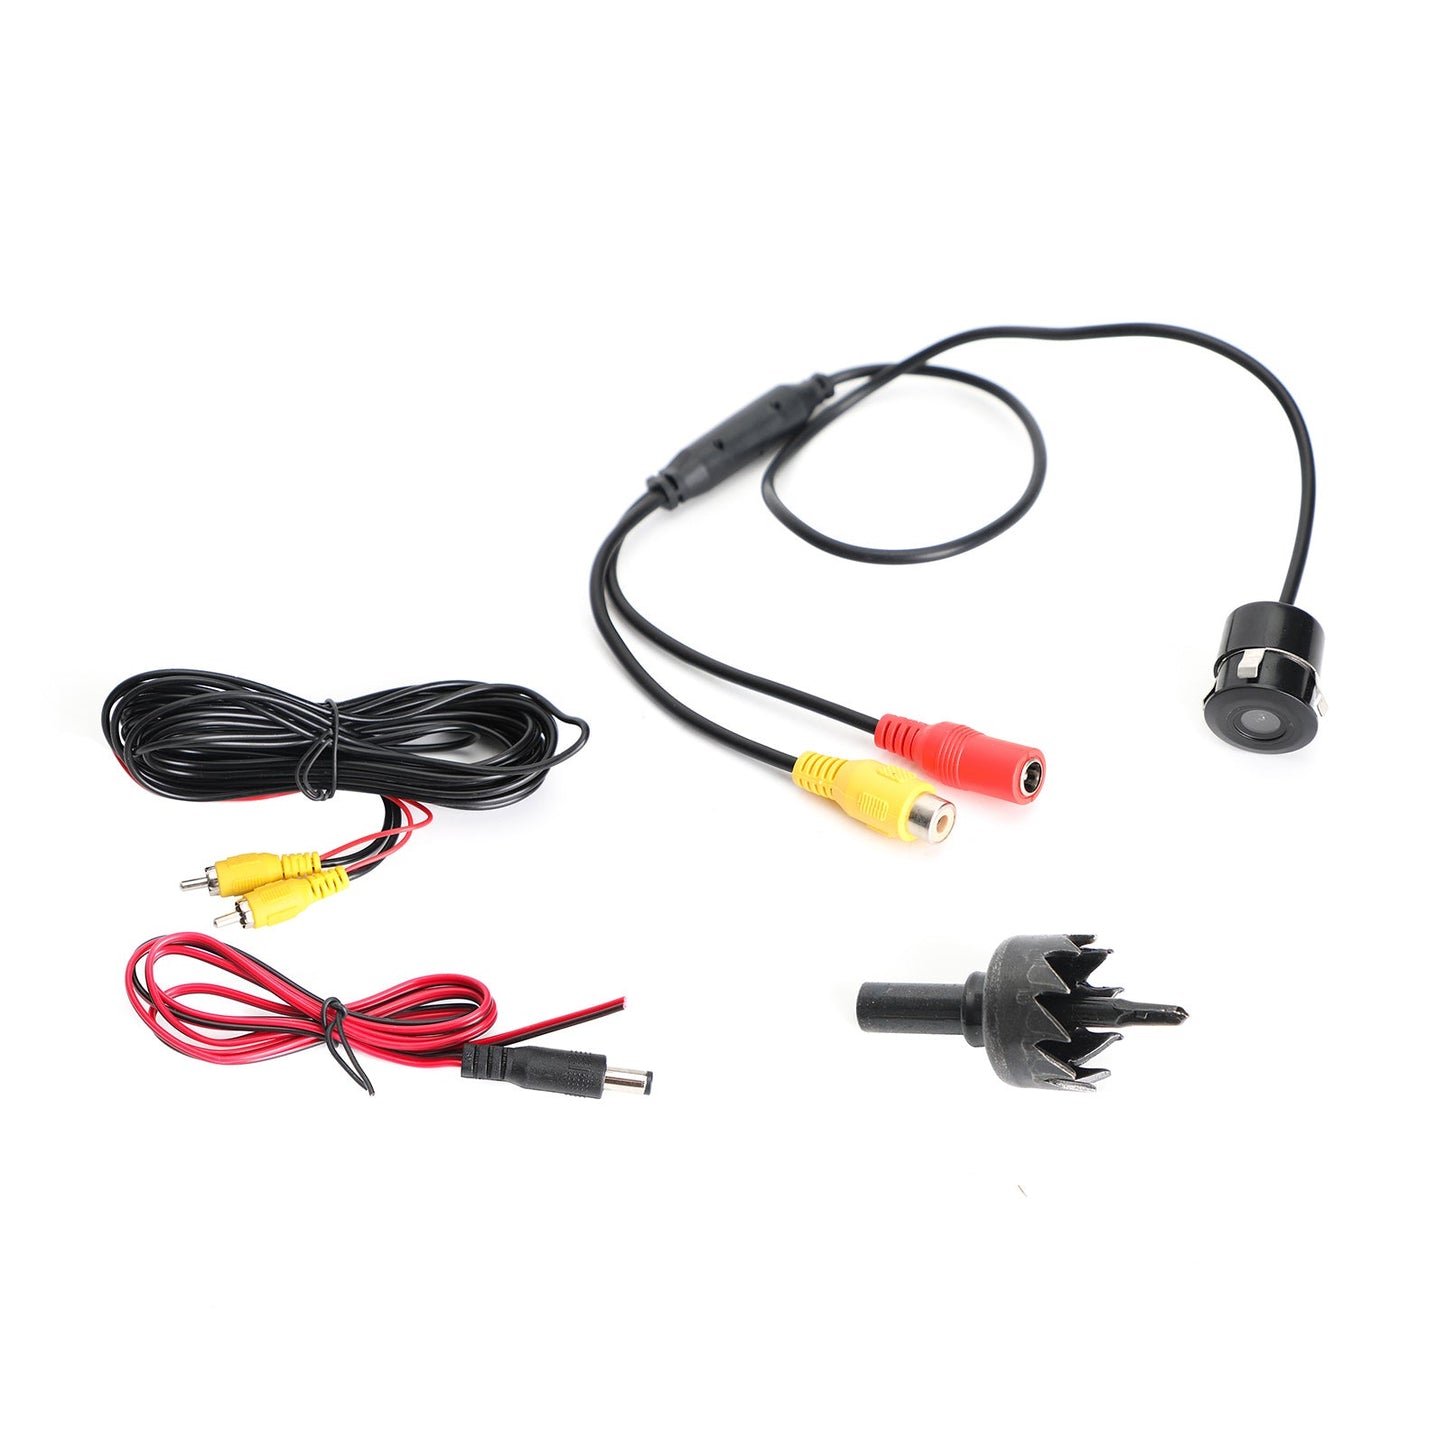 170°Wide Car Wireless Rear View Reverse Camera 18.5mm Punch Hole HD Night Vision